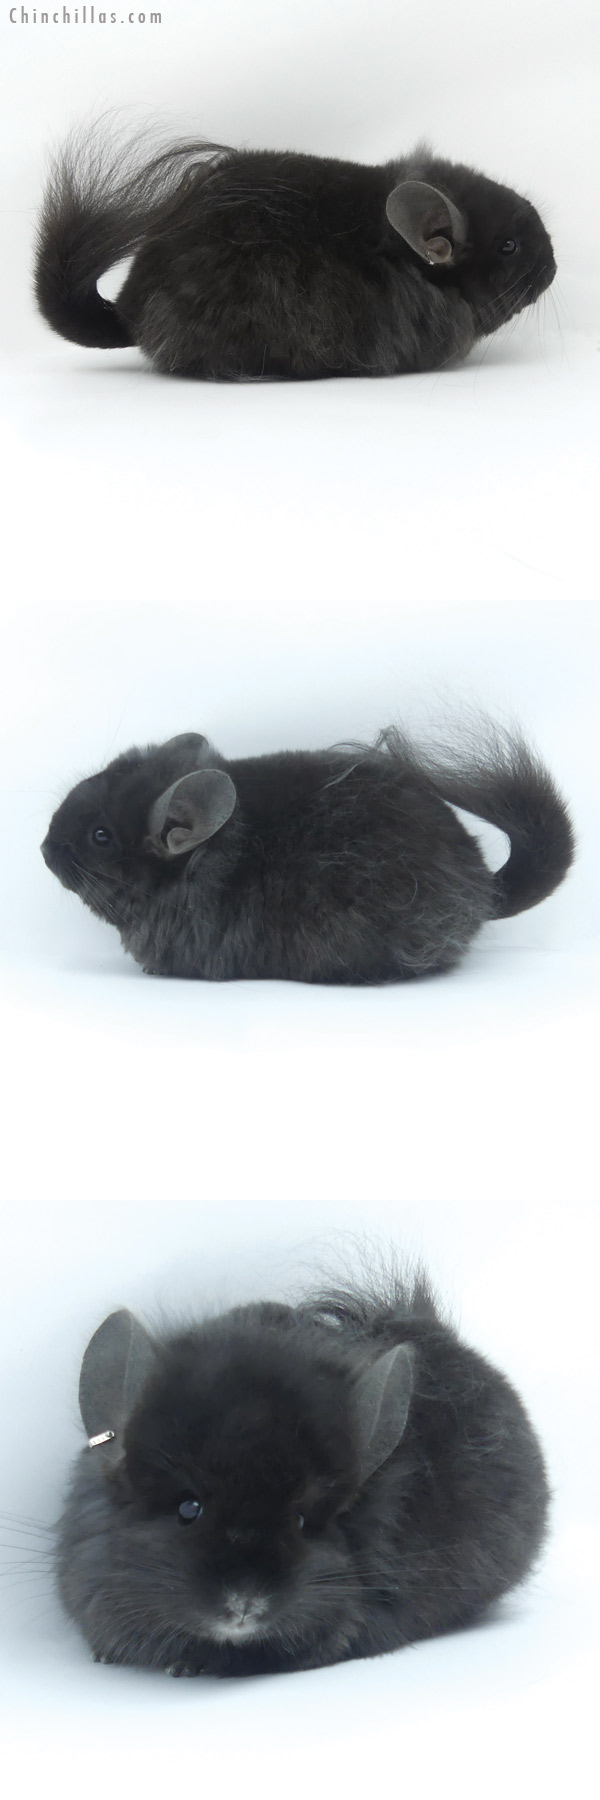 Chinchilla or related item offered for sale or export on Chinchillas.com - 19418 Exceptional Ebony ( Locken Carrier ) G2  Royal Persian Angora Female Chinchilla